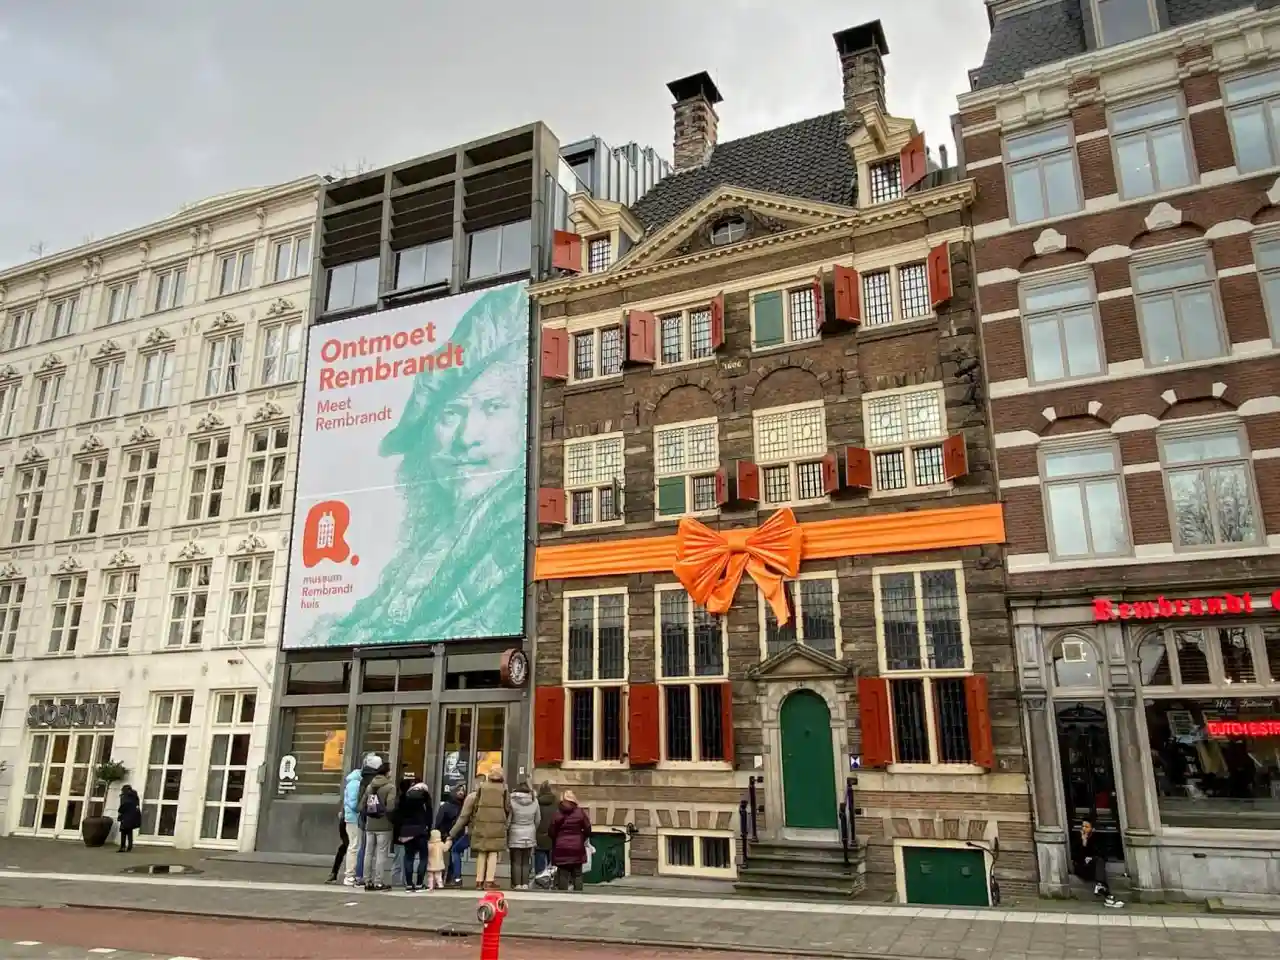 Rembrandthuis Museum in Amsterdam